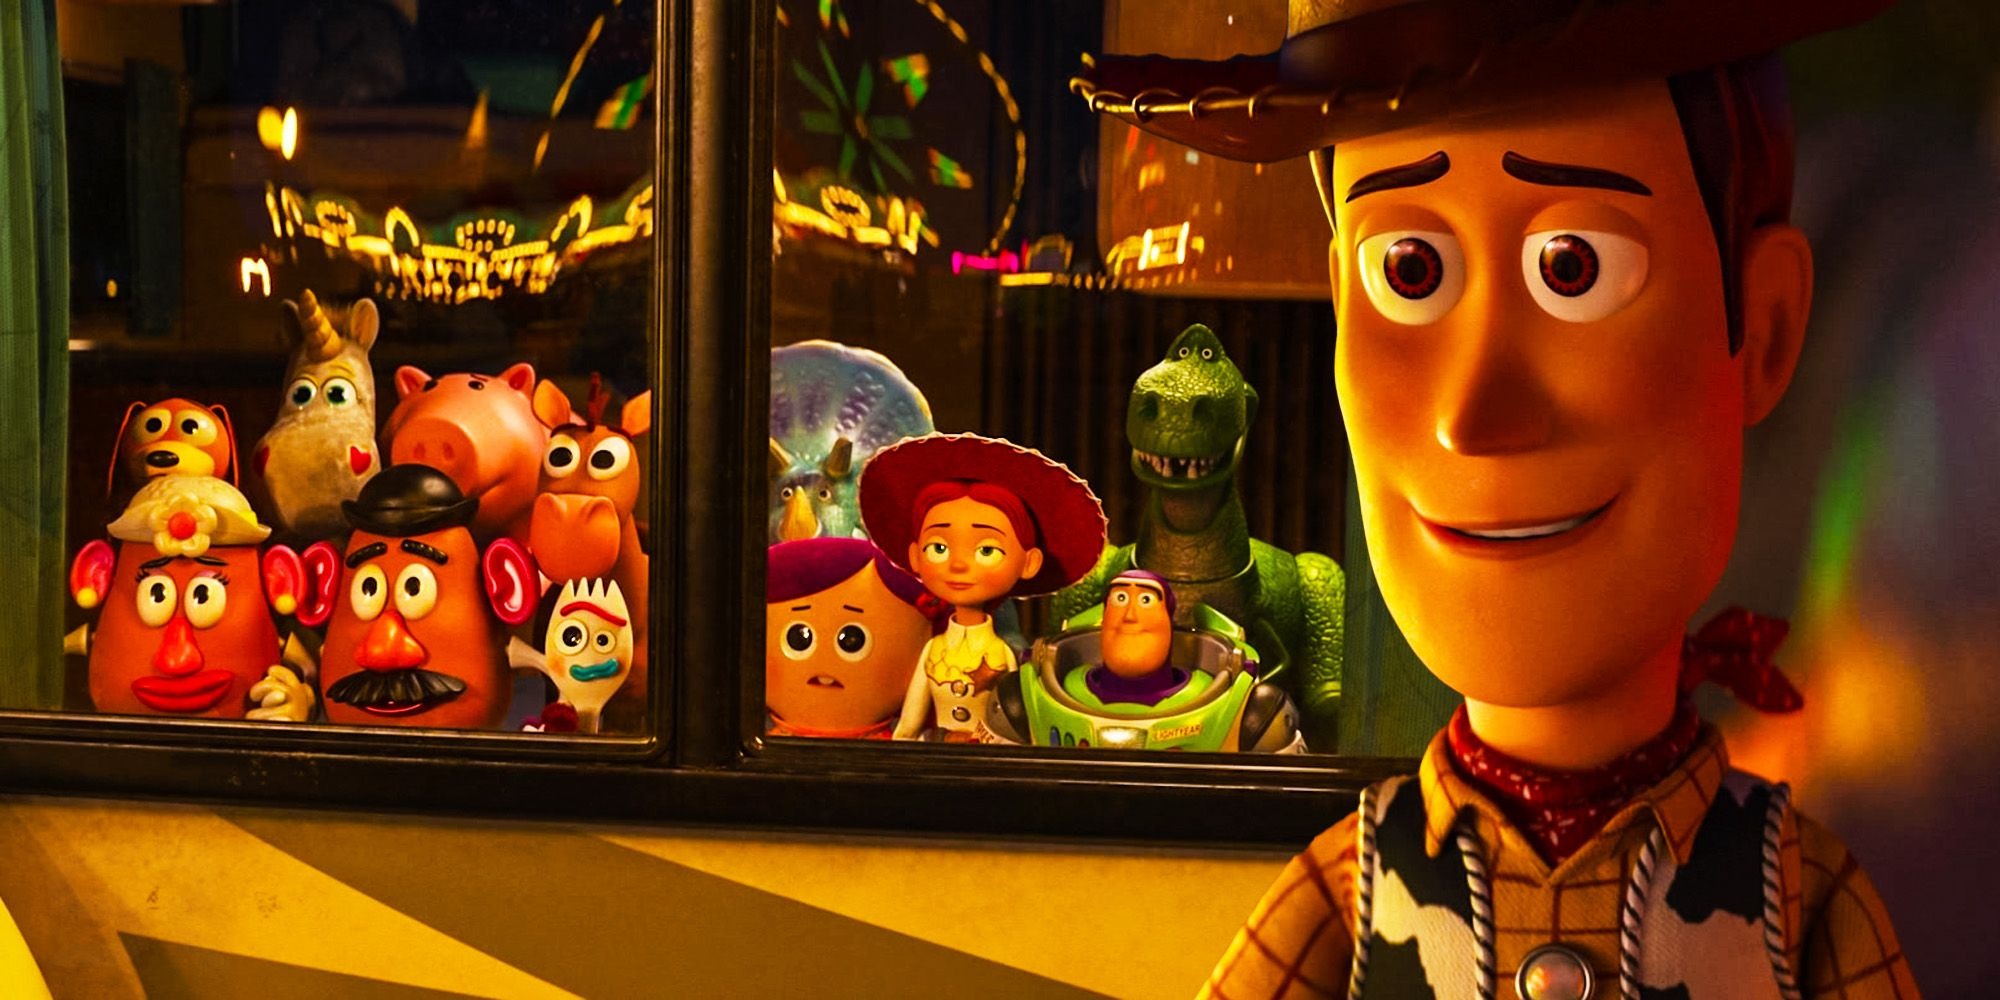 Toy Story 5 Can Use The Canceled Idea By Disney 18 Years Ago: &Quot;Woody And Buzz Are Back?&Quot;